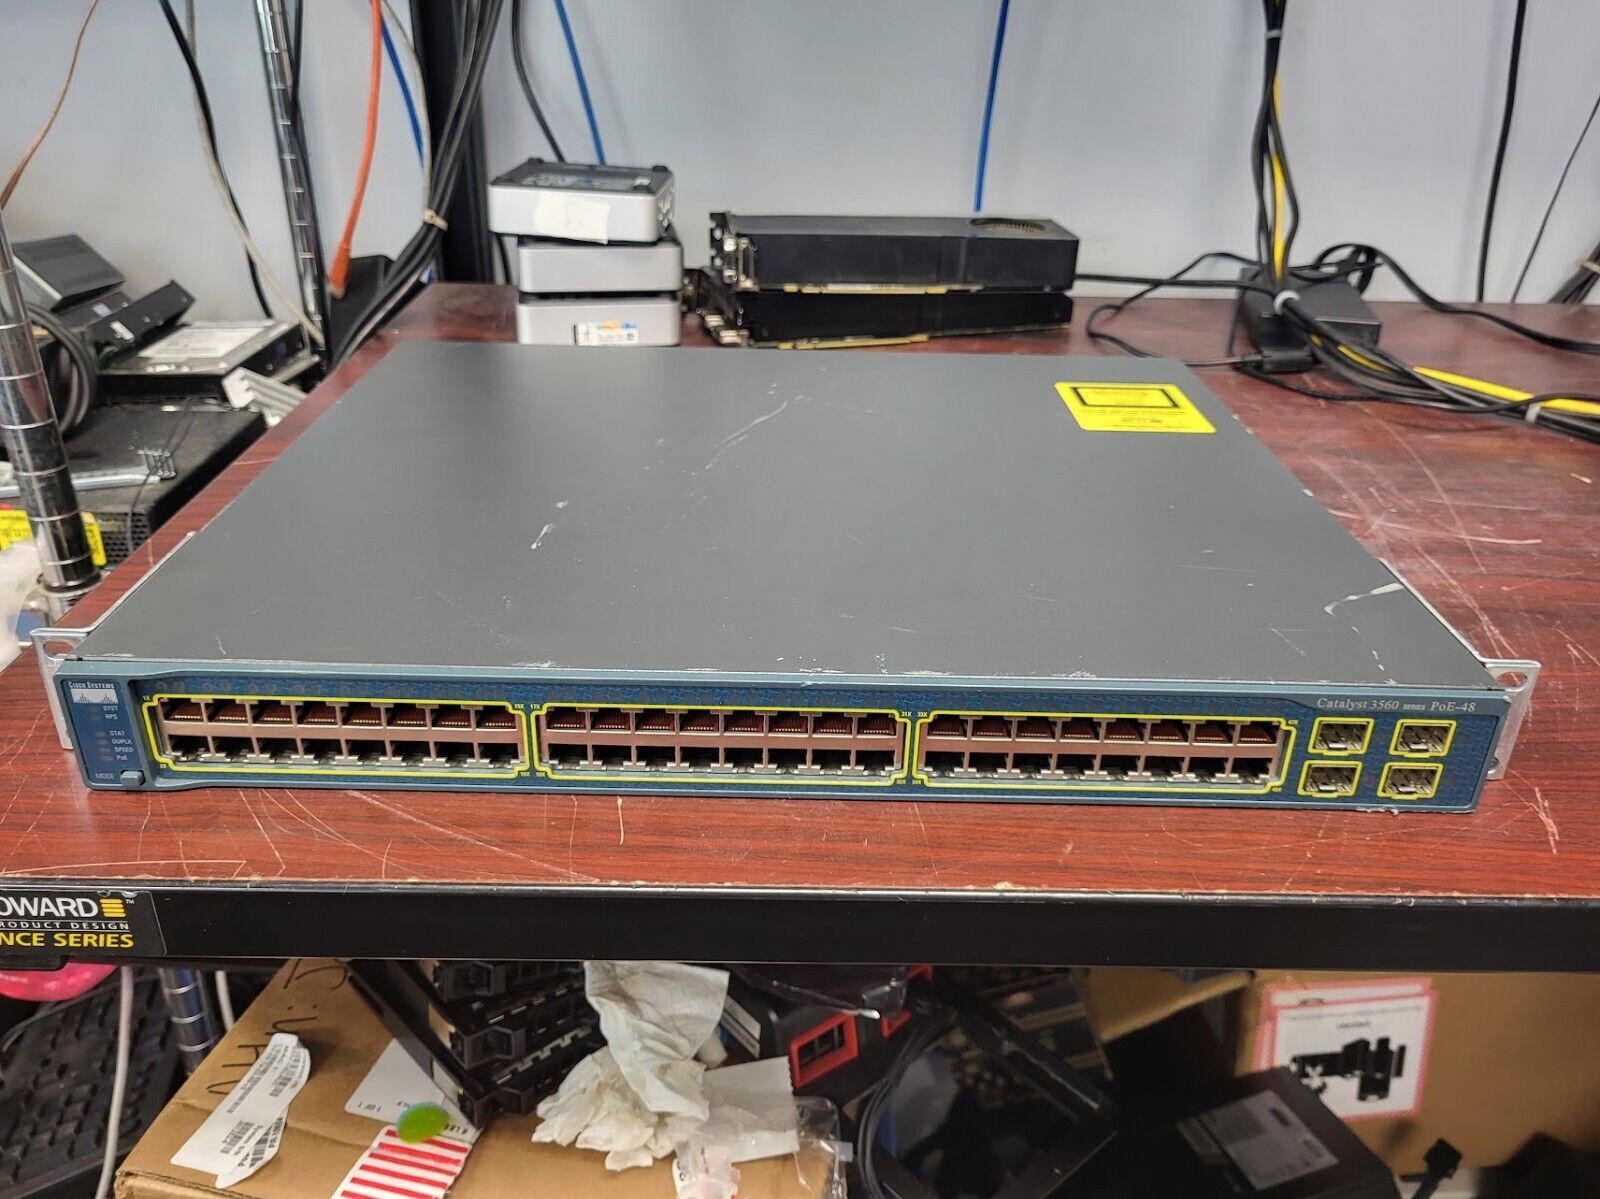 Cisco Catalyst 3560 Series WS-C3560-48PS-S PoE Managed Switch #73